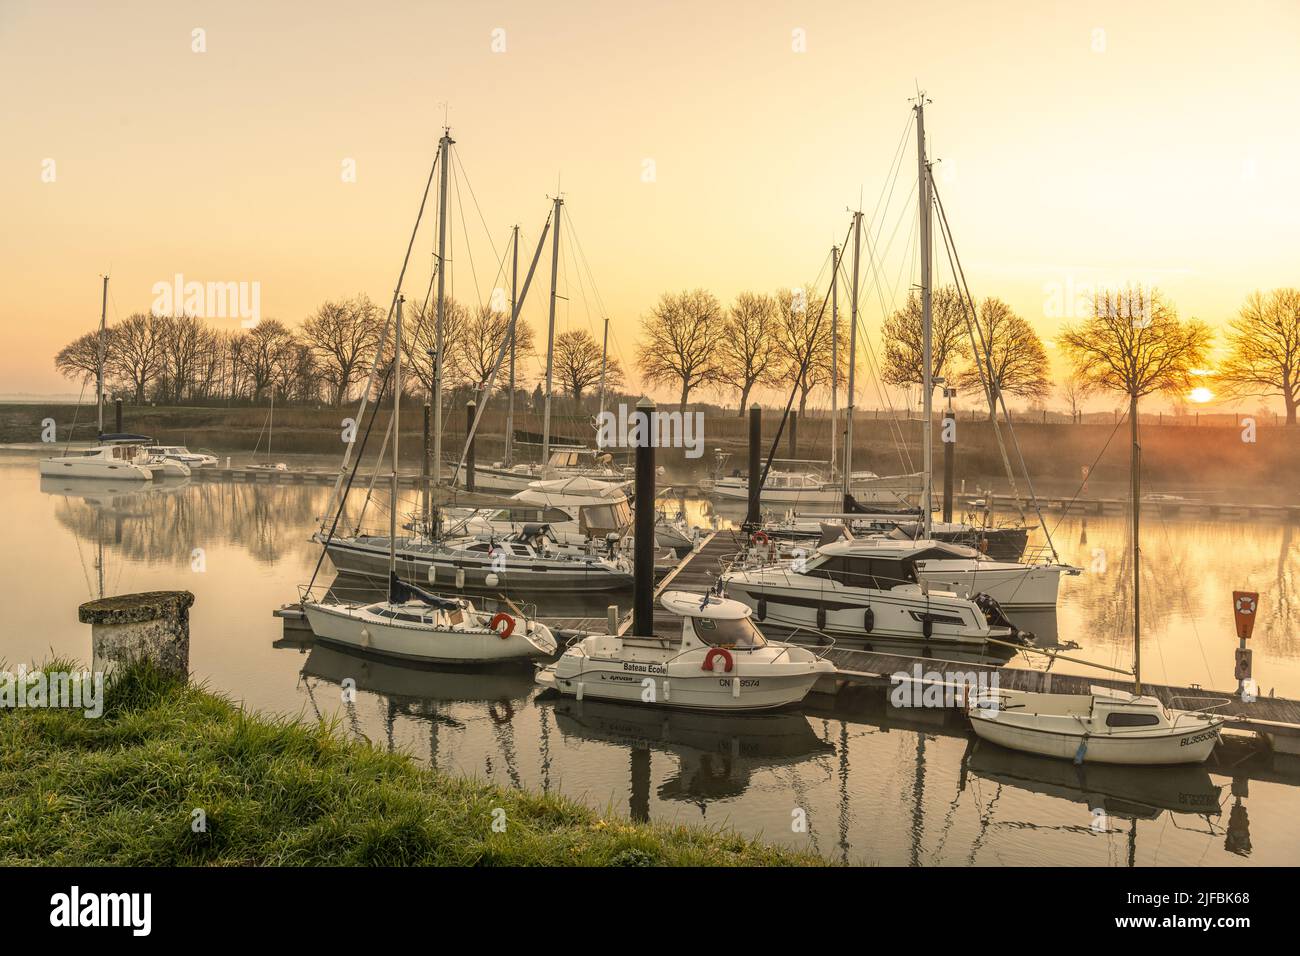 France, Somme, Baie de Somme, Saint-Valery-sur-Somme, The port of Saint-Valery in the early morning Stock Photo